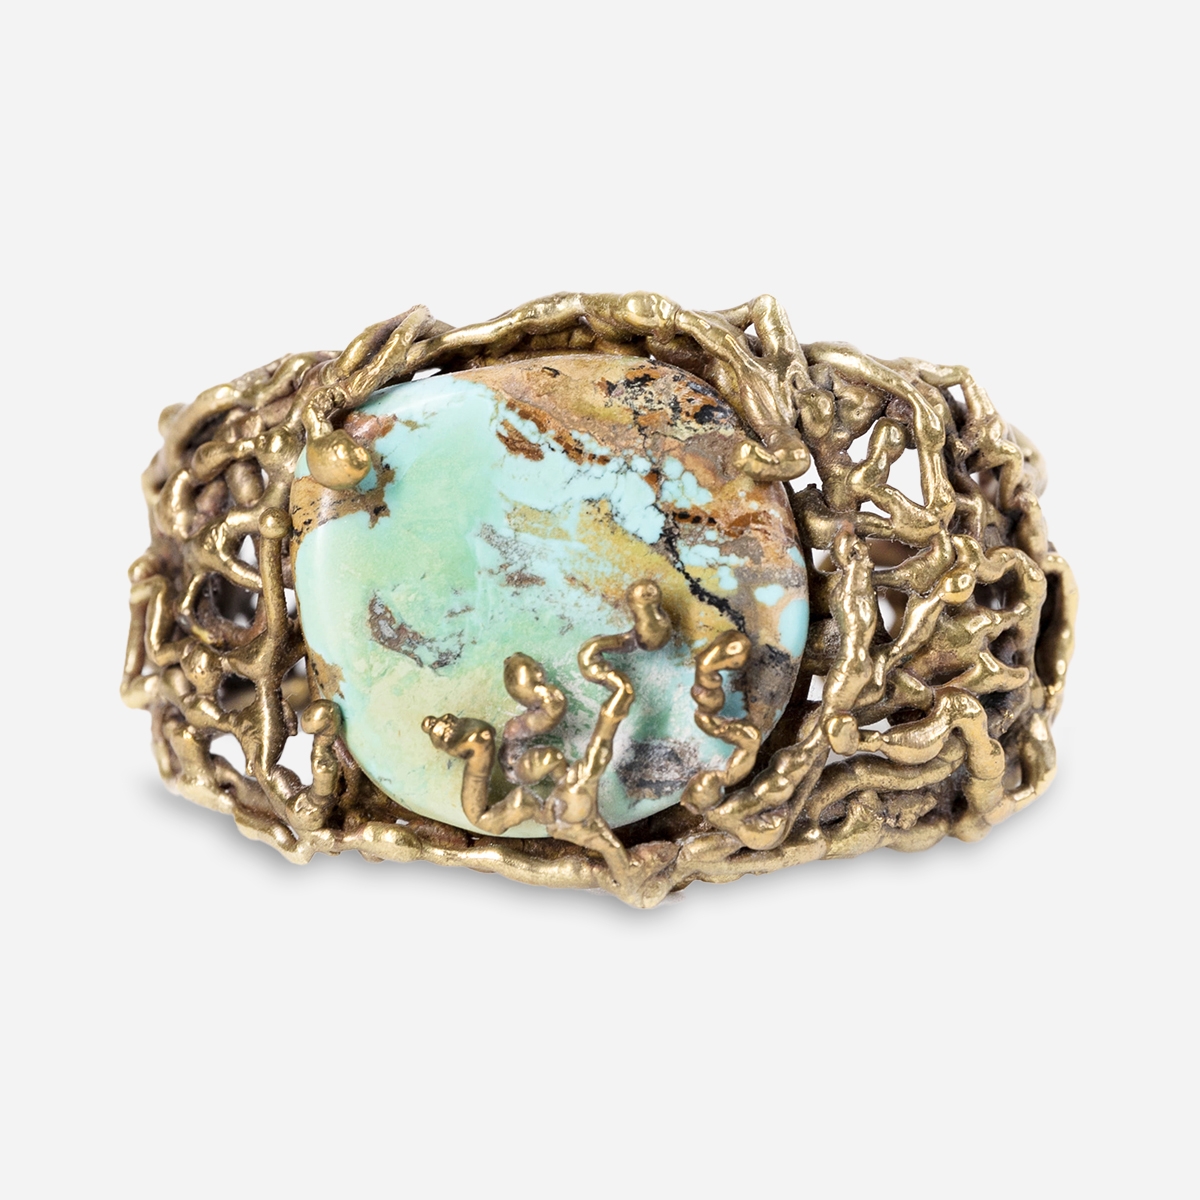 Gold and turquoise brutalist cuff bracelet